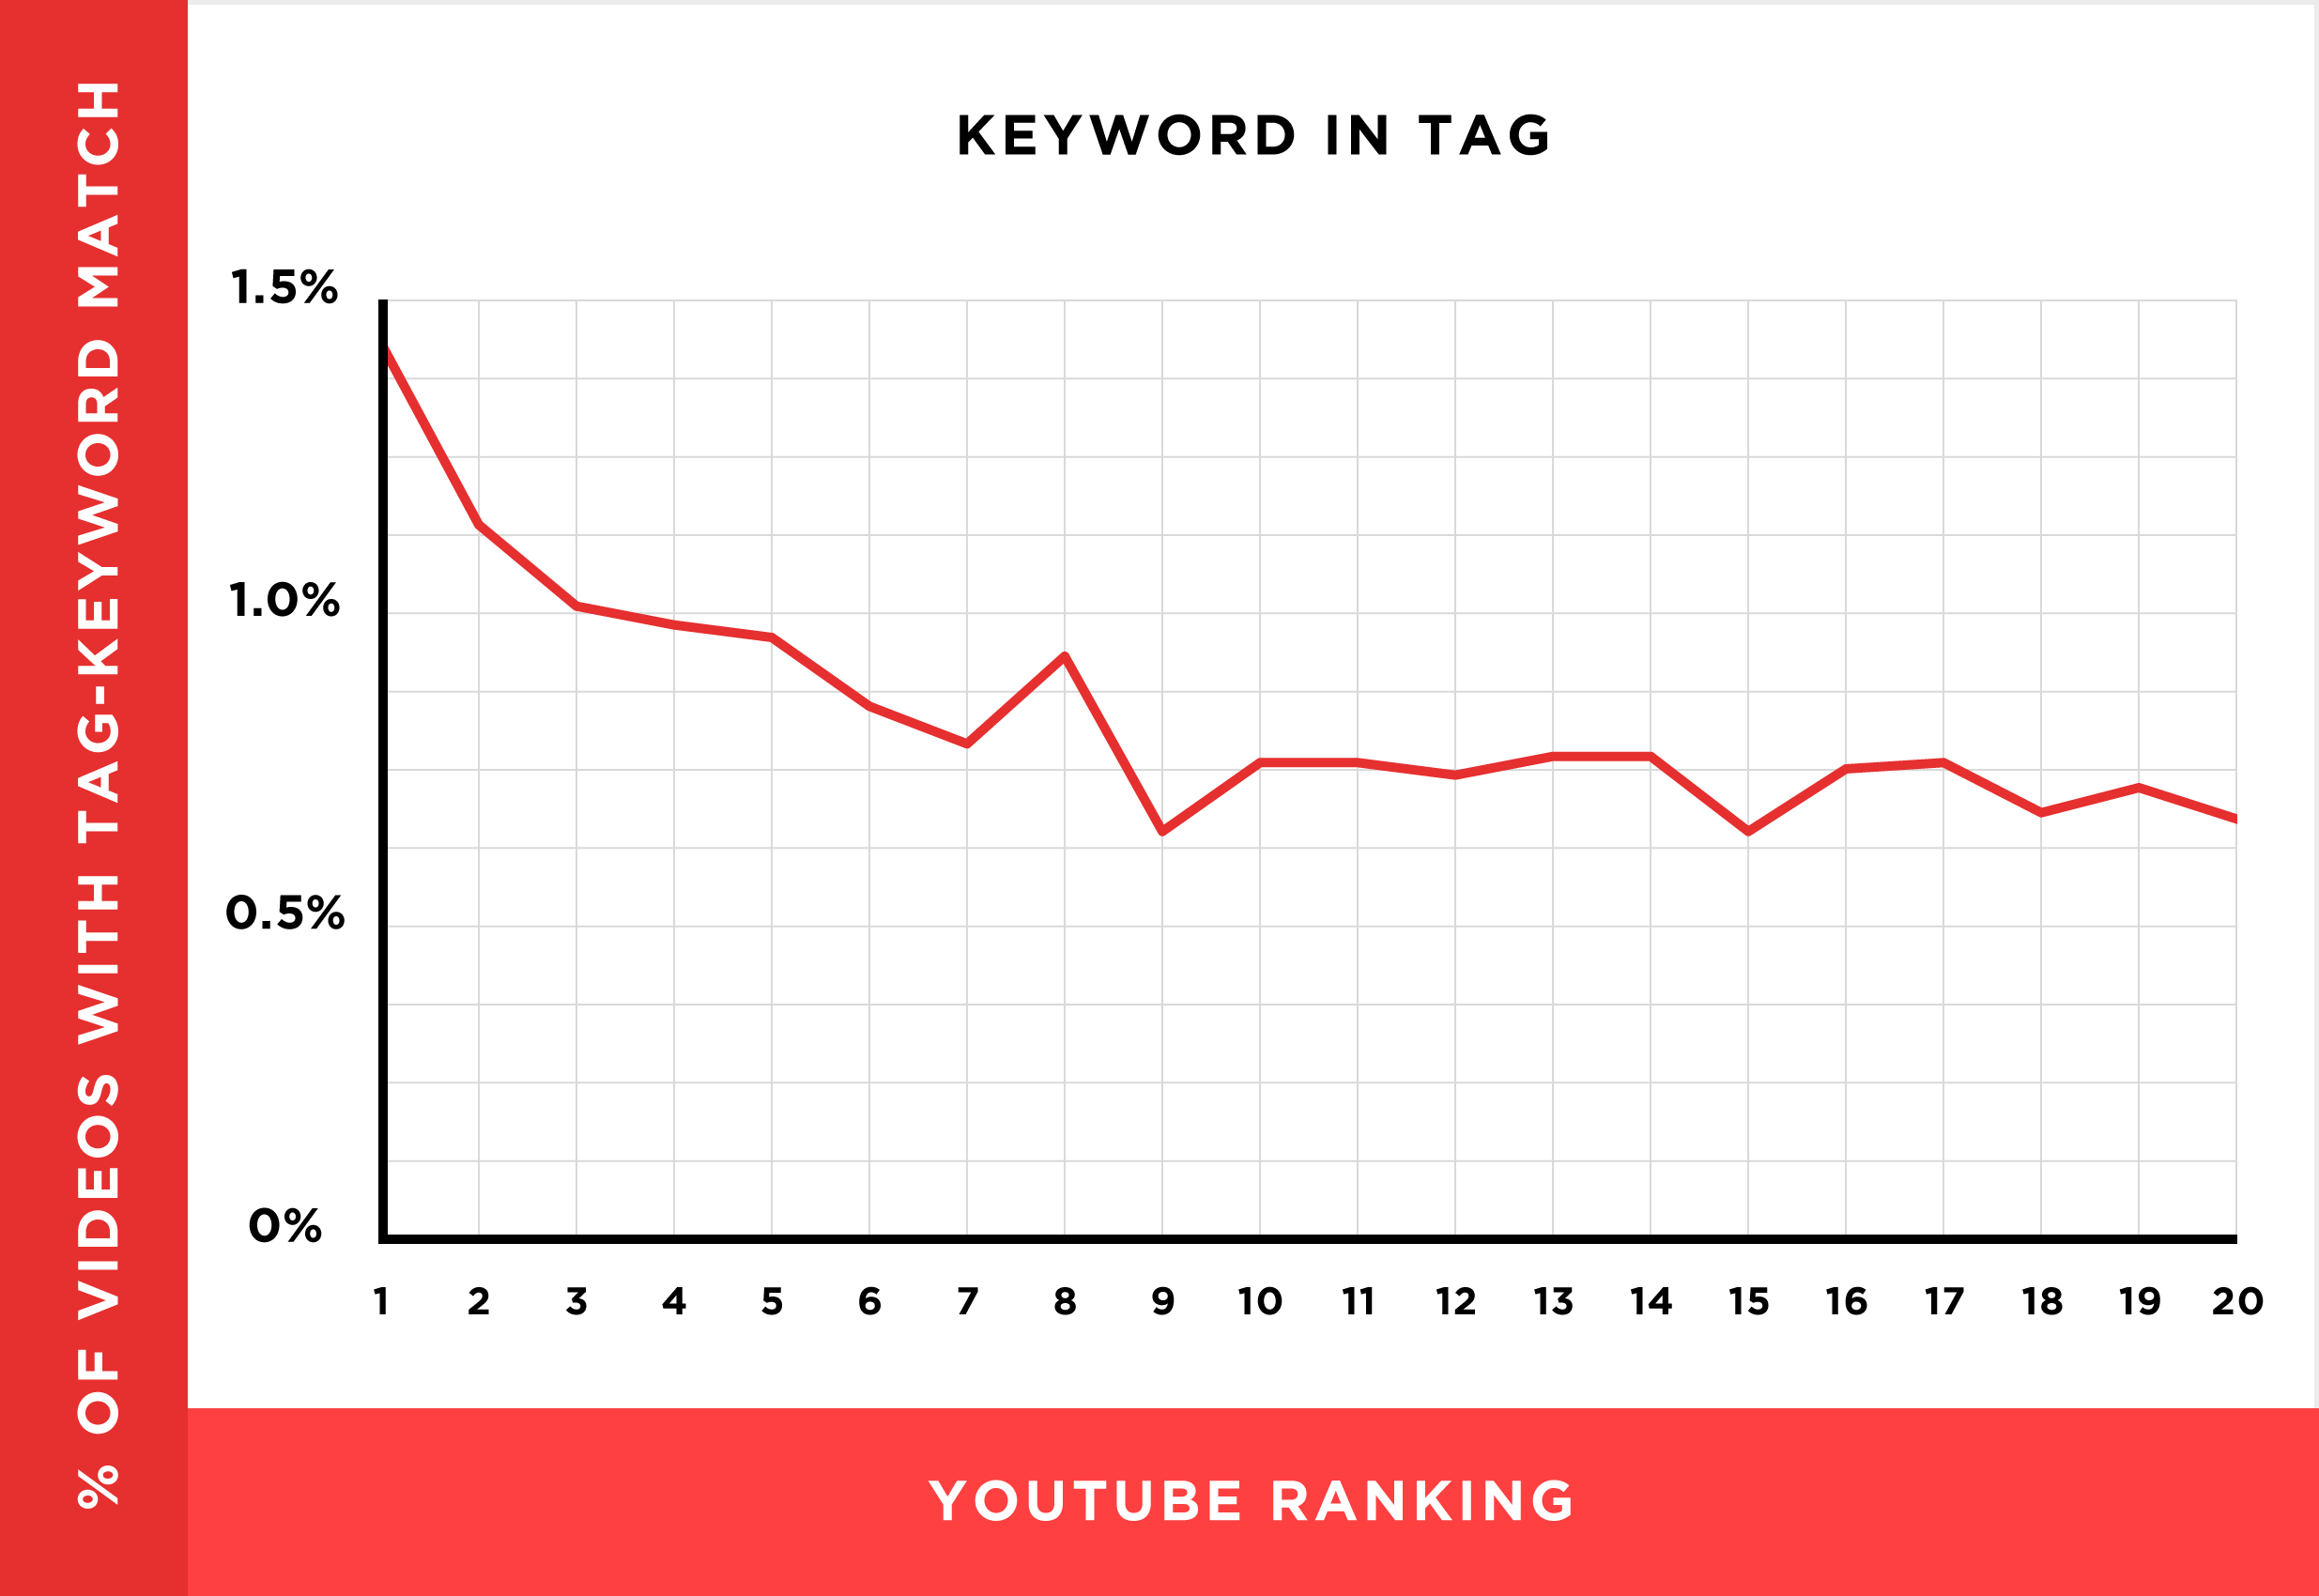 tags and video rankings